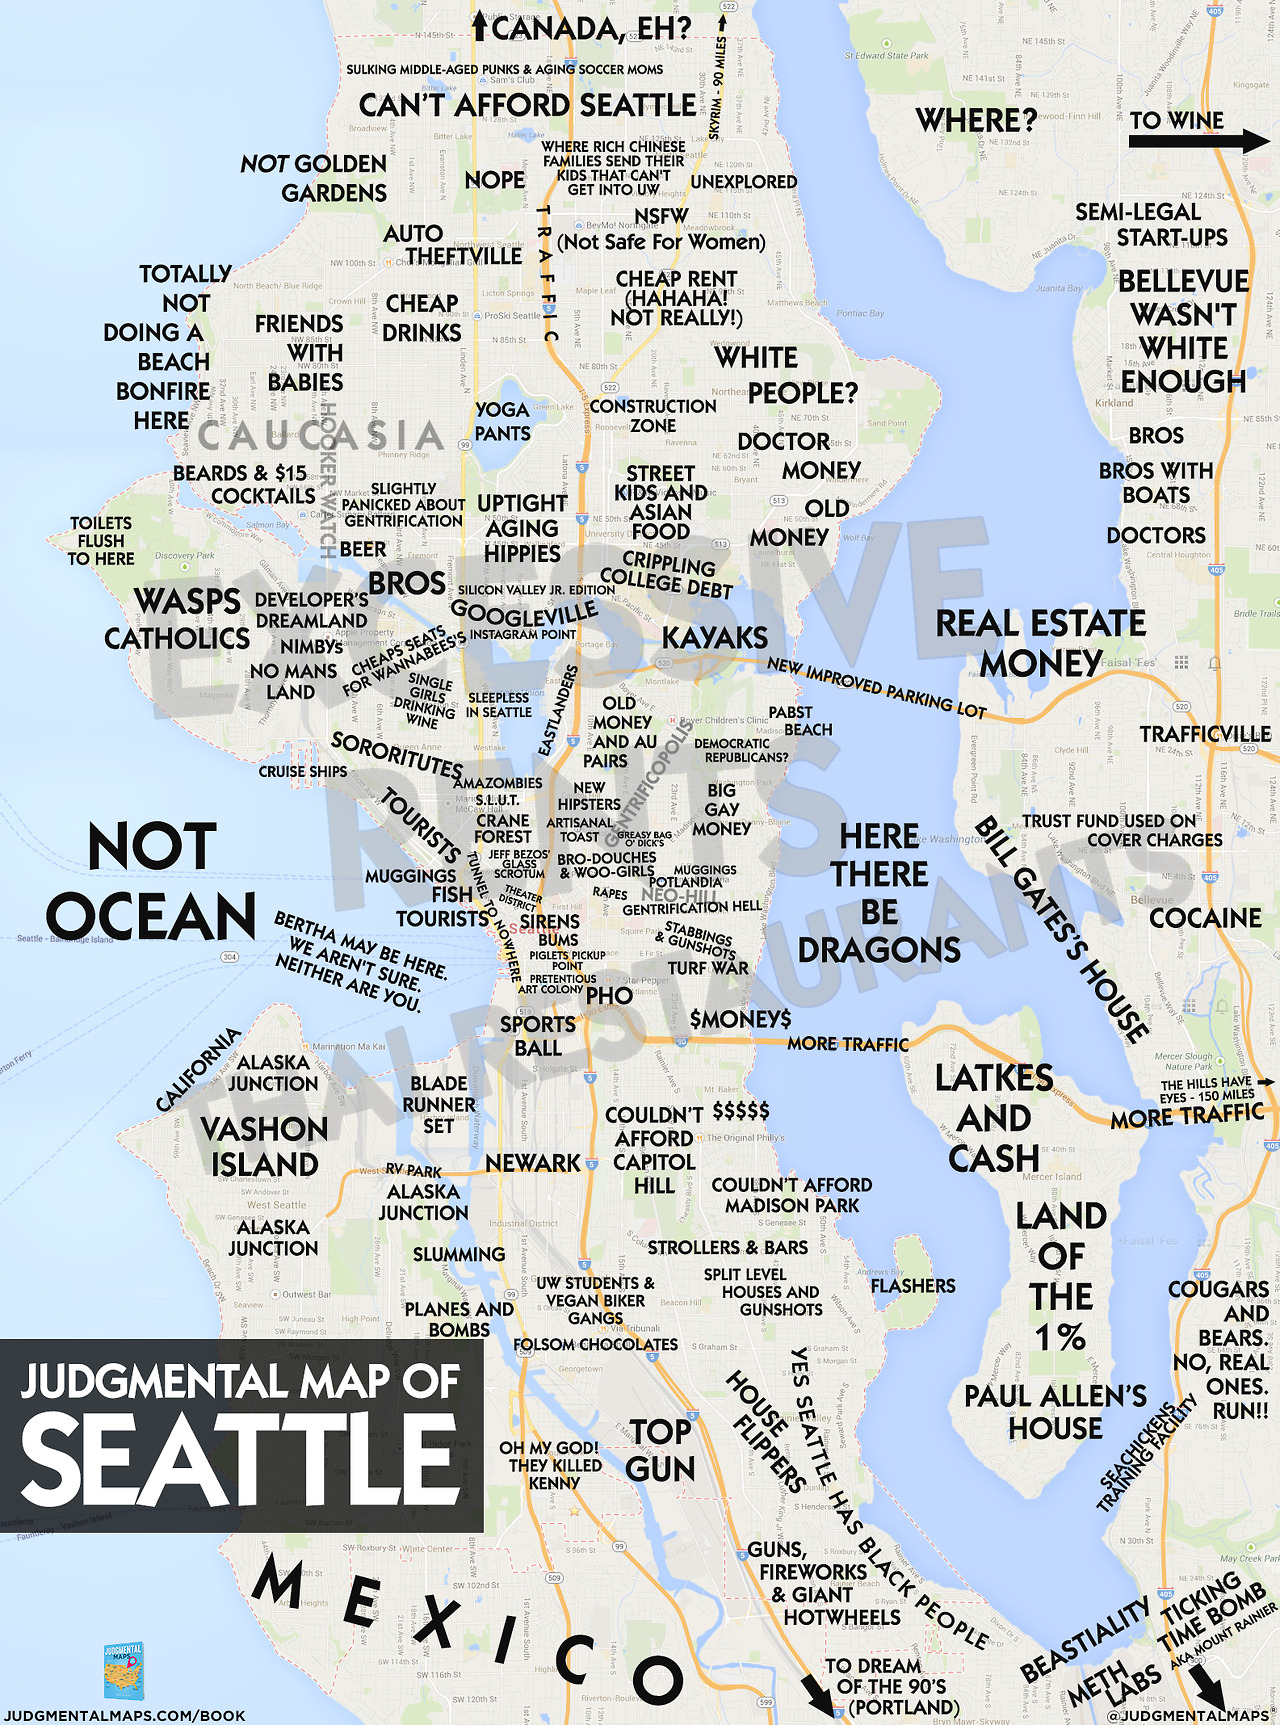 Map of Seattle with humerous stereotype commentary about neighborhoods and regions.